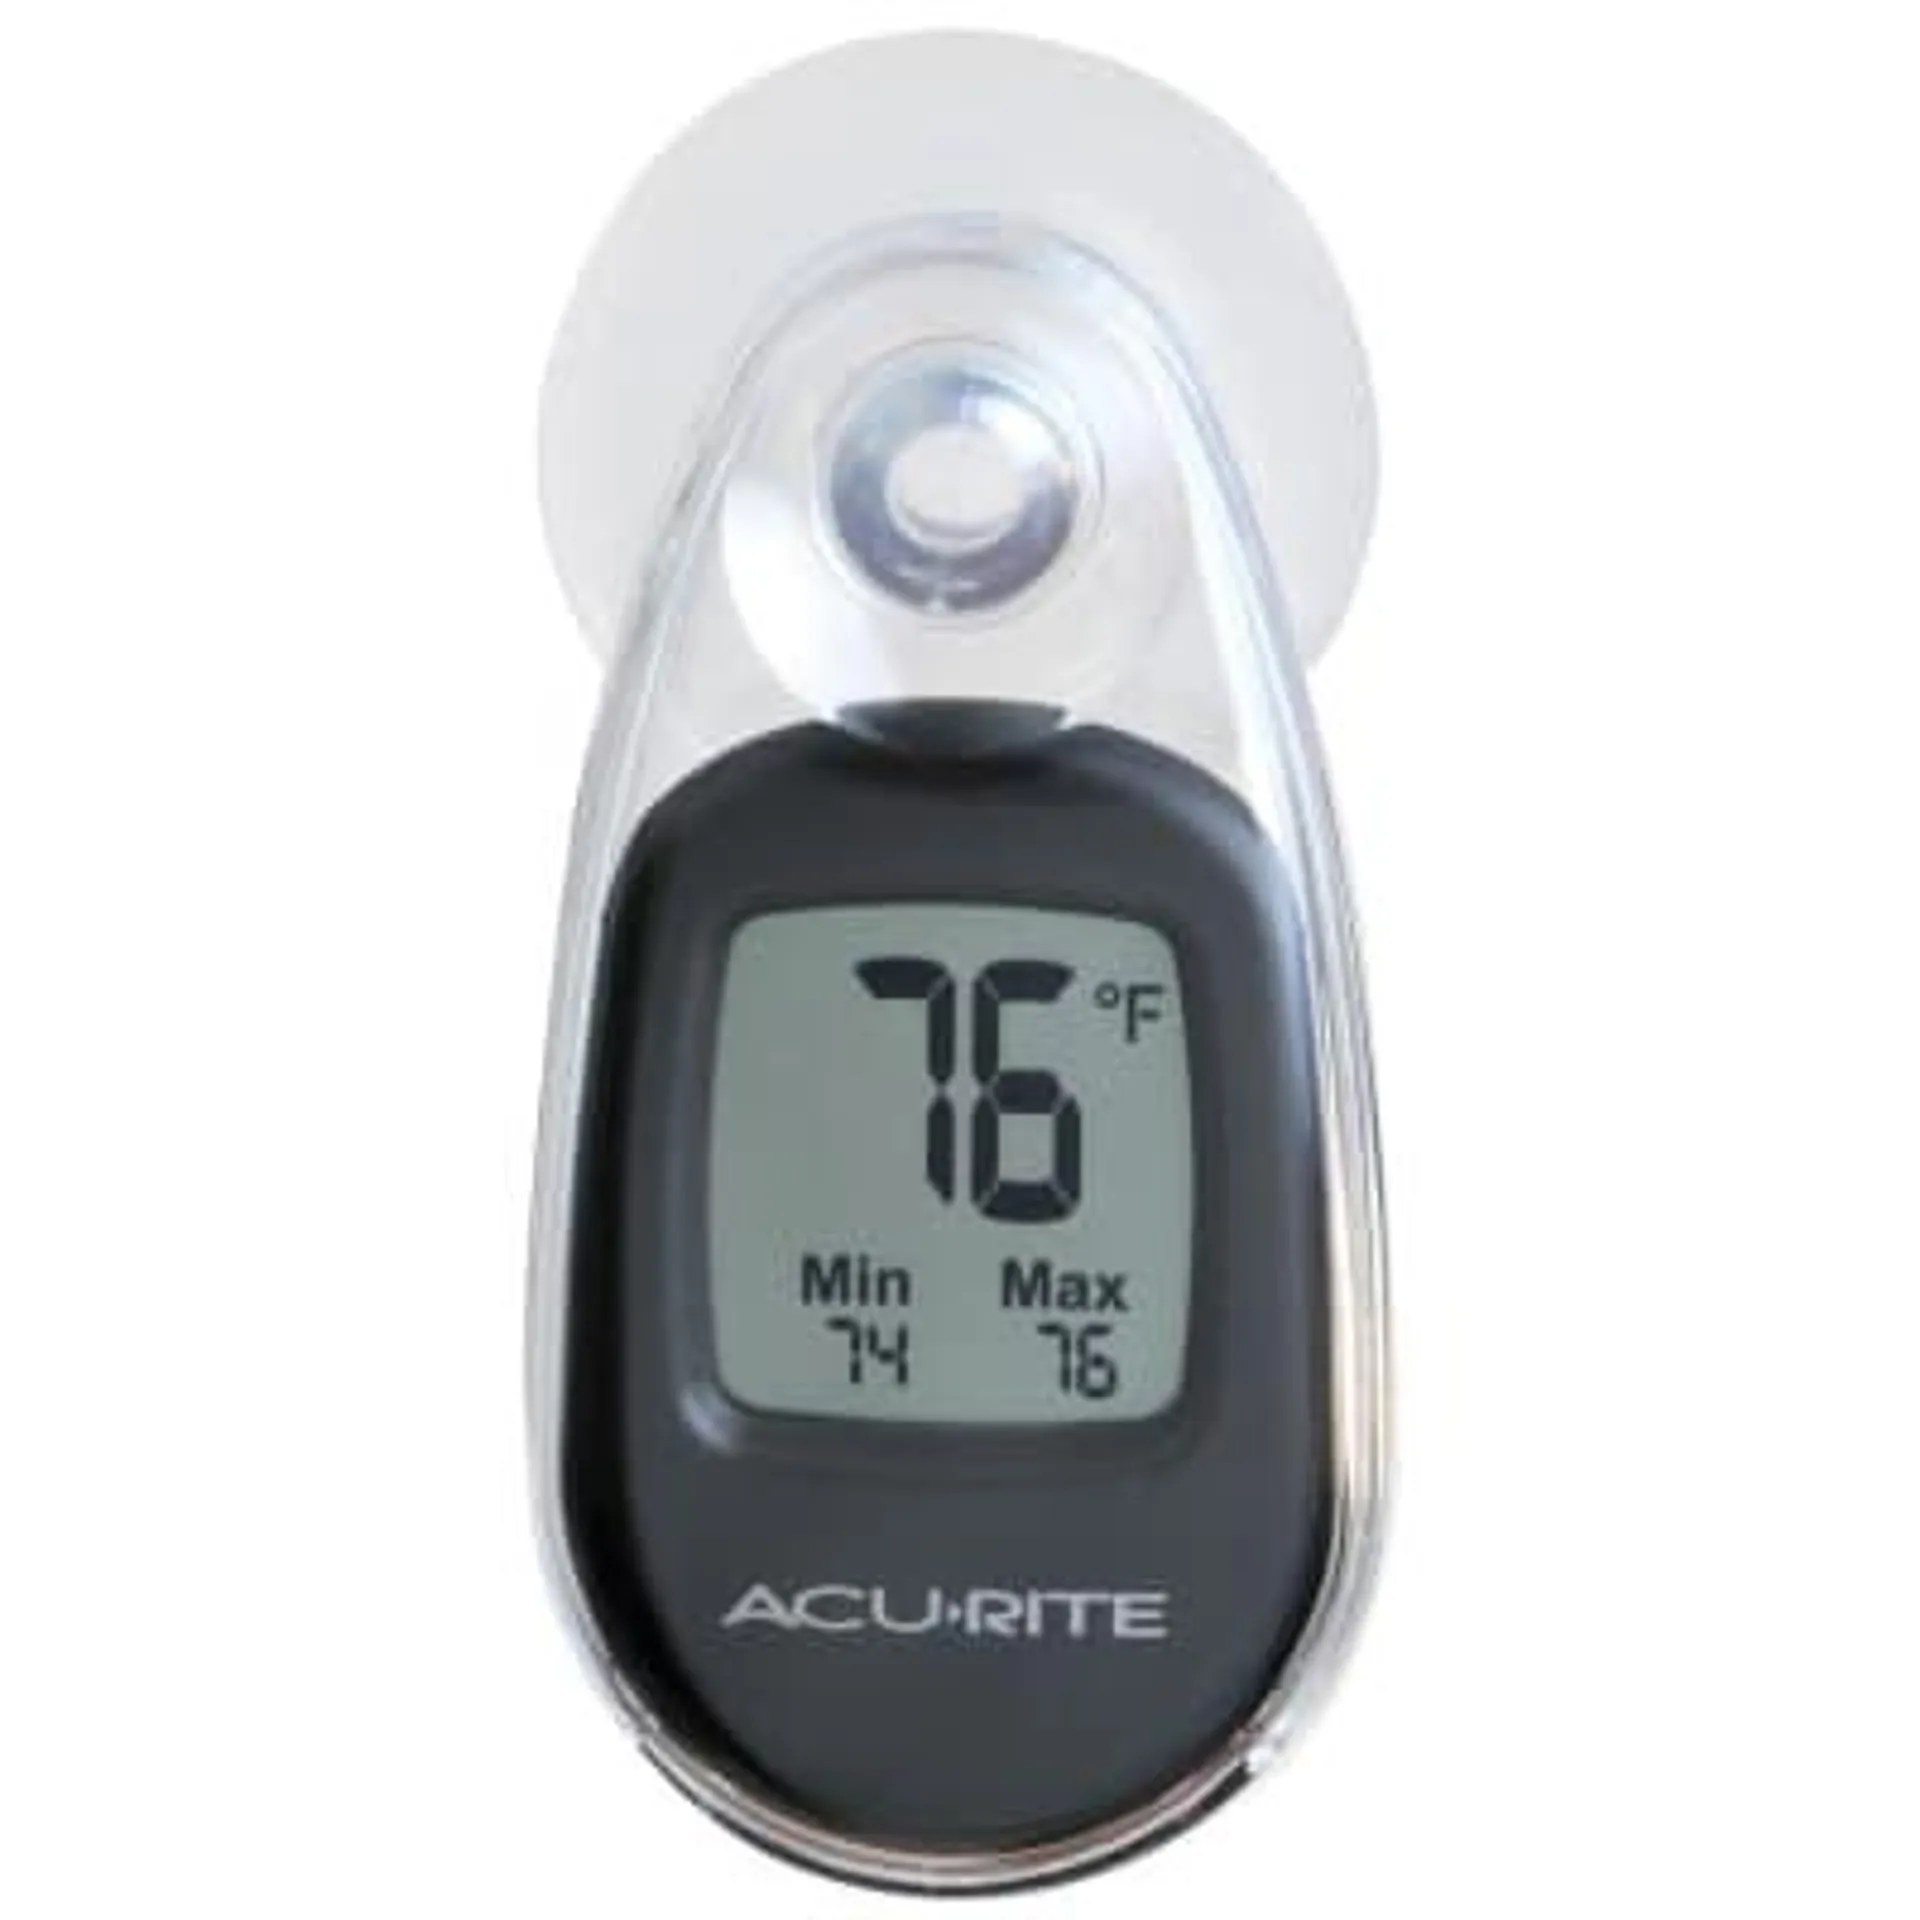 AcuRite Suction Cup Thermometer - Black